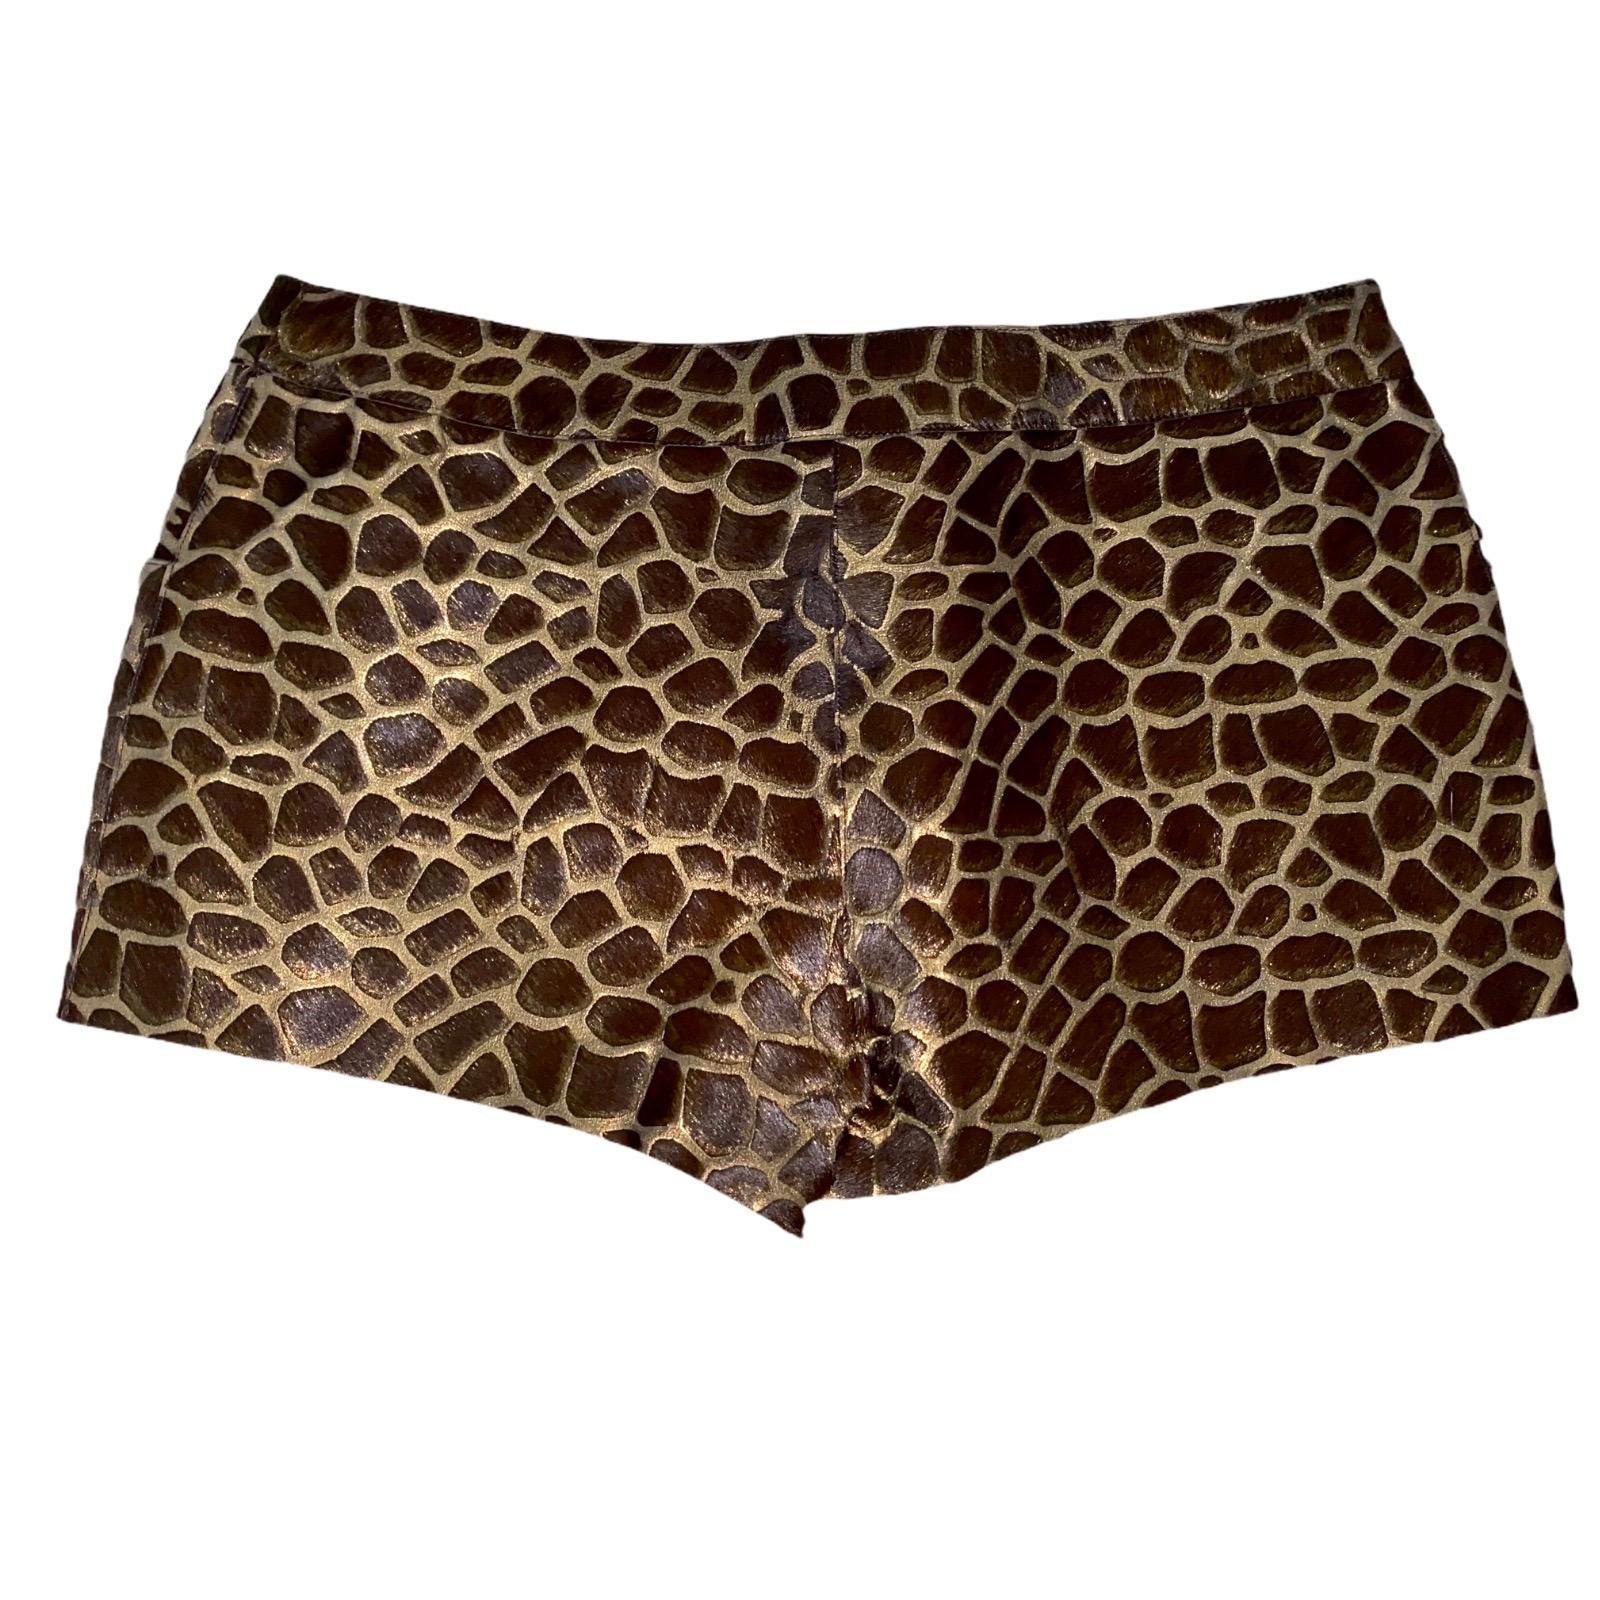  Rare piece!
Chanel leather hot pants in safari style 
    Metallic leather with fur trimming
   Gorgeous animal print
    Golden button with CC logo
Two side pockets
    Made in France
Size 40
    Dry Clean Only
Made in France